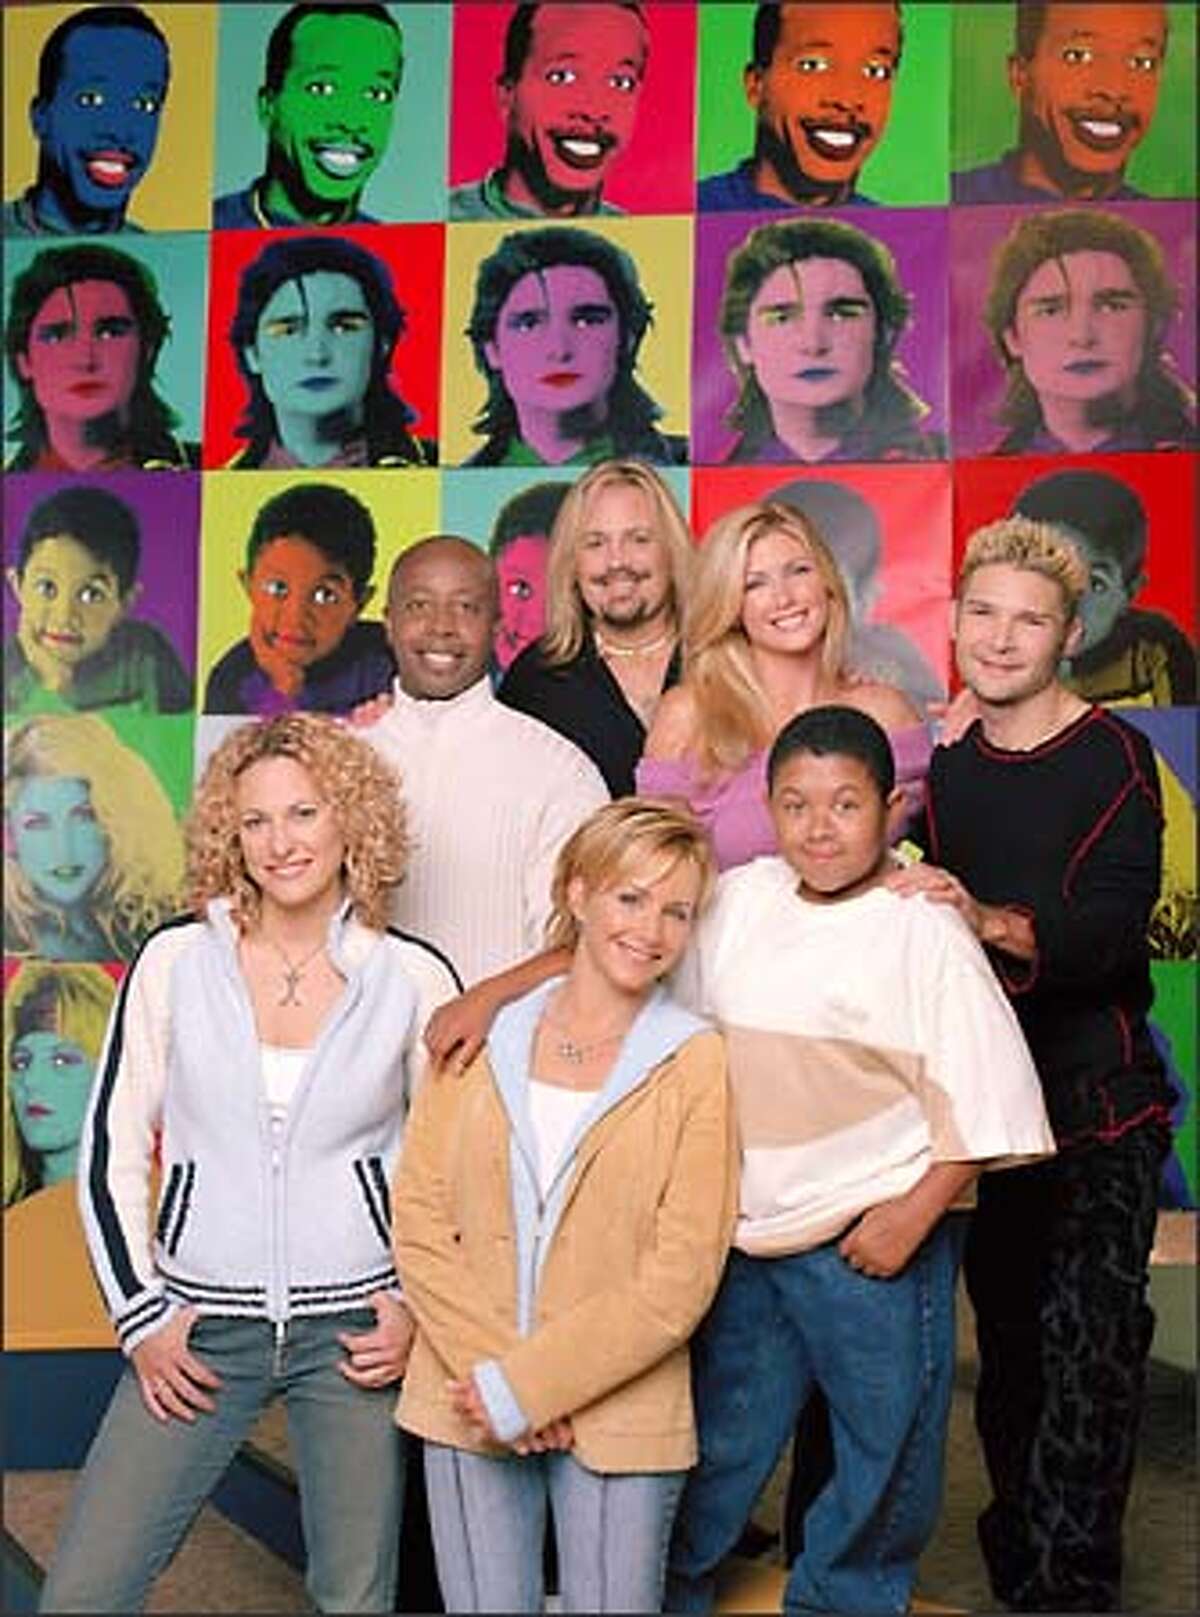 Do you remember all these people? The cast of The WB's "The Surreal Life": (front, l-r) Jerri Manthey, Gabrielle Carteris, Emmanuel Lewis; (back, l-r) MC Hammer, Vince Neil, Brande Roderick, Corey Feldman.